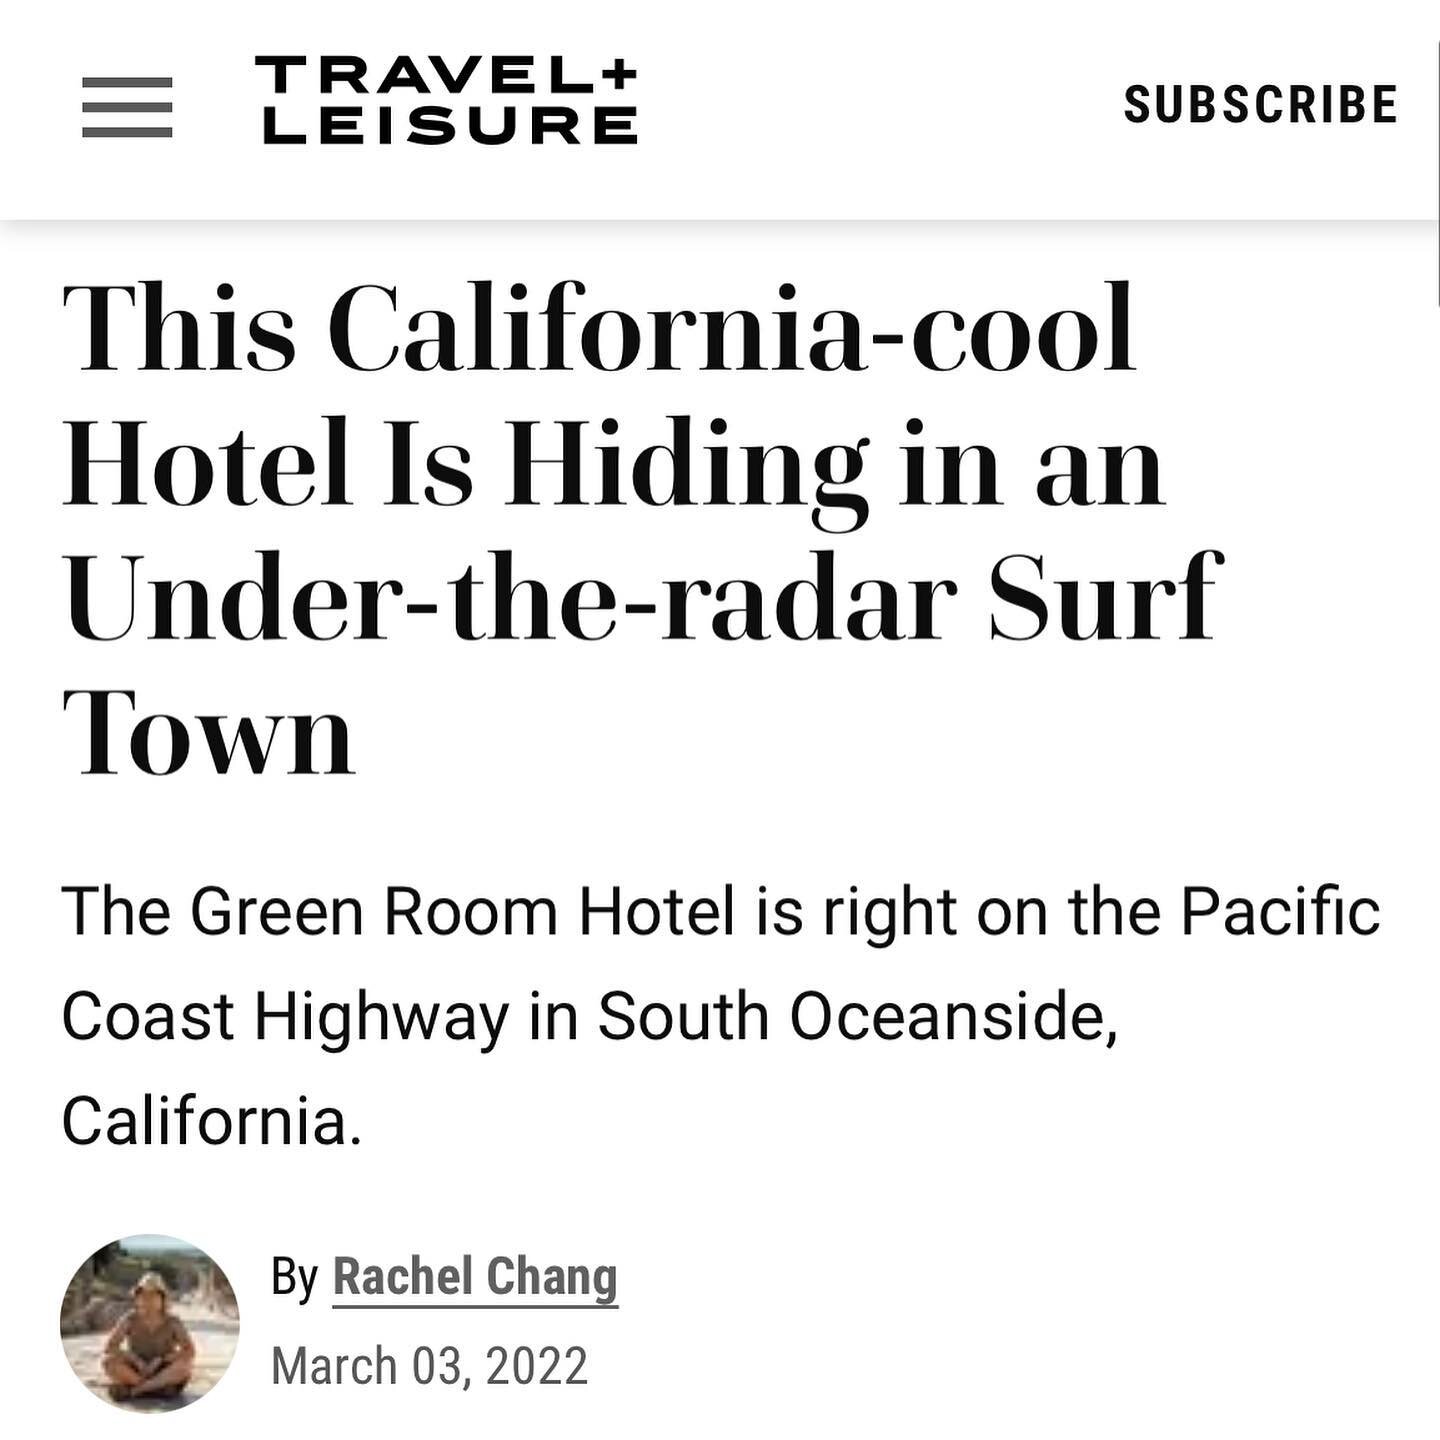 Excited to share that we&rsquo;ve been featured today in T&amp;L&rsquo;s Hotel Openings! Check it out:

https://www.travelandleisure.com/hotels-resorts/hotel-openings/green-room-hotel-oceanside-california

Book now and save between 10-15% off our Spr